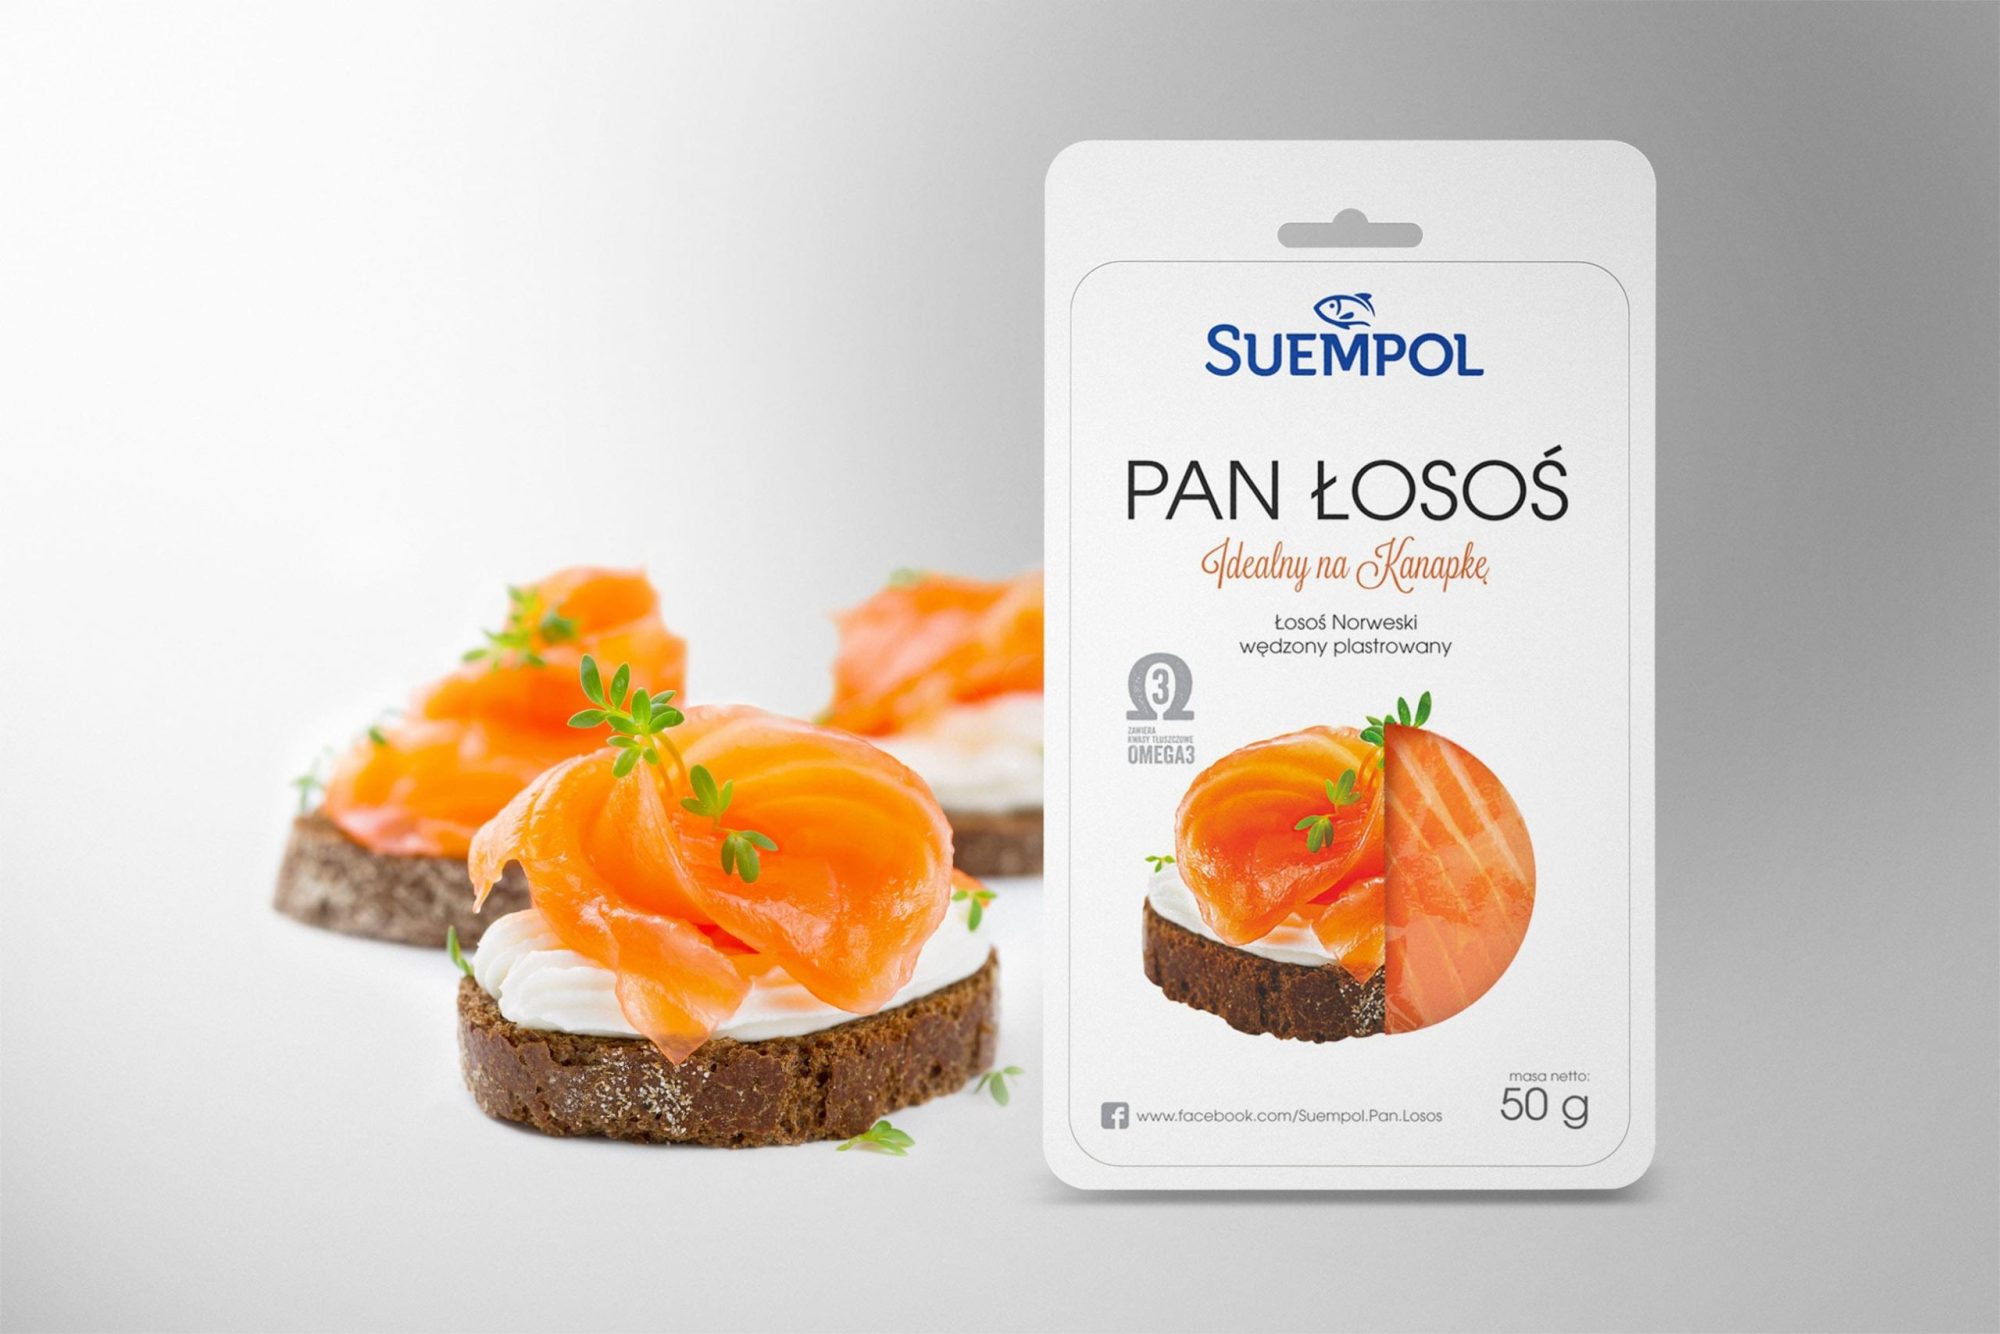 suempol-smoked-salmon-packaging-design-graphic-branding-sliced-agency-studio-ideal-sandwich-woman-omega3-fish-packaging-label-design-pictoo